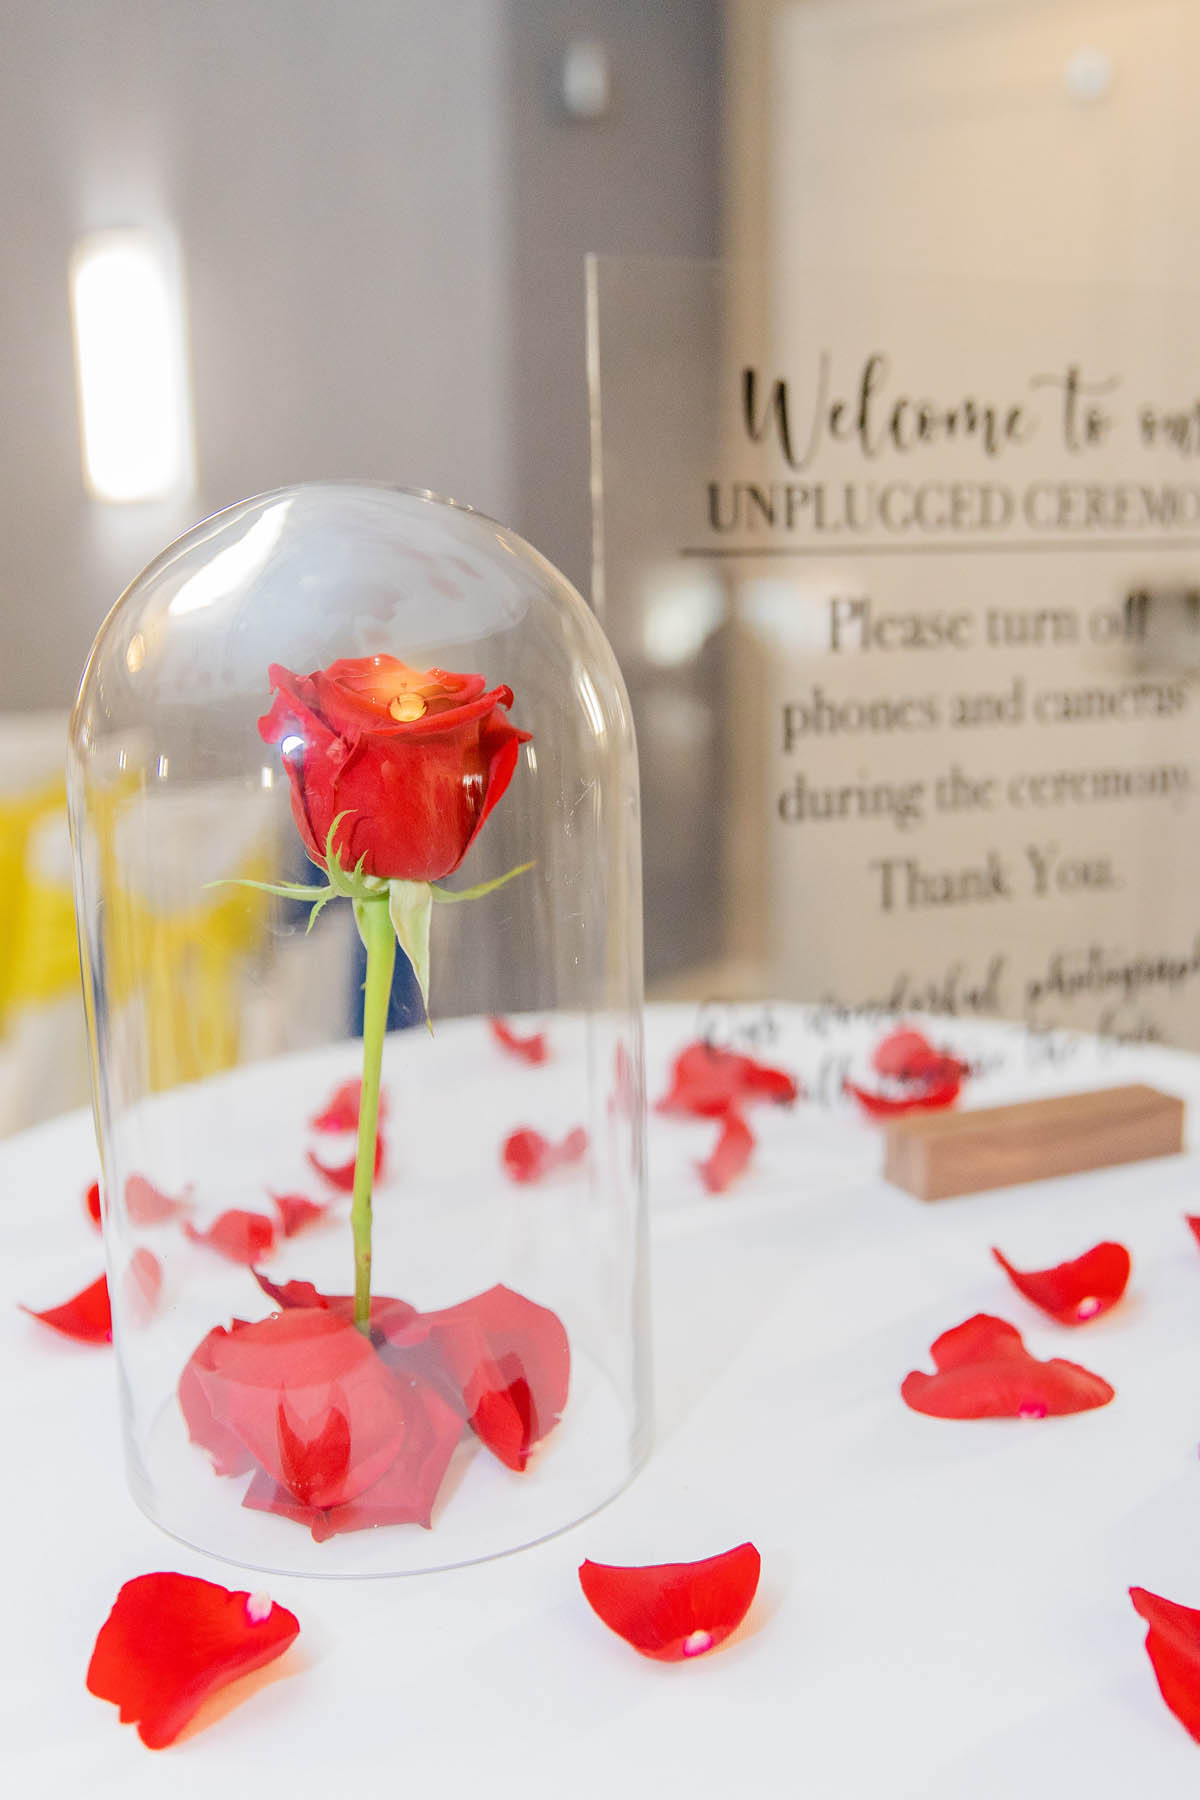 A red rose encased in a glass cover sits on a white table cloth with petals strewn around.